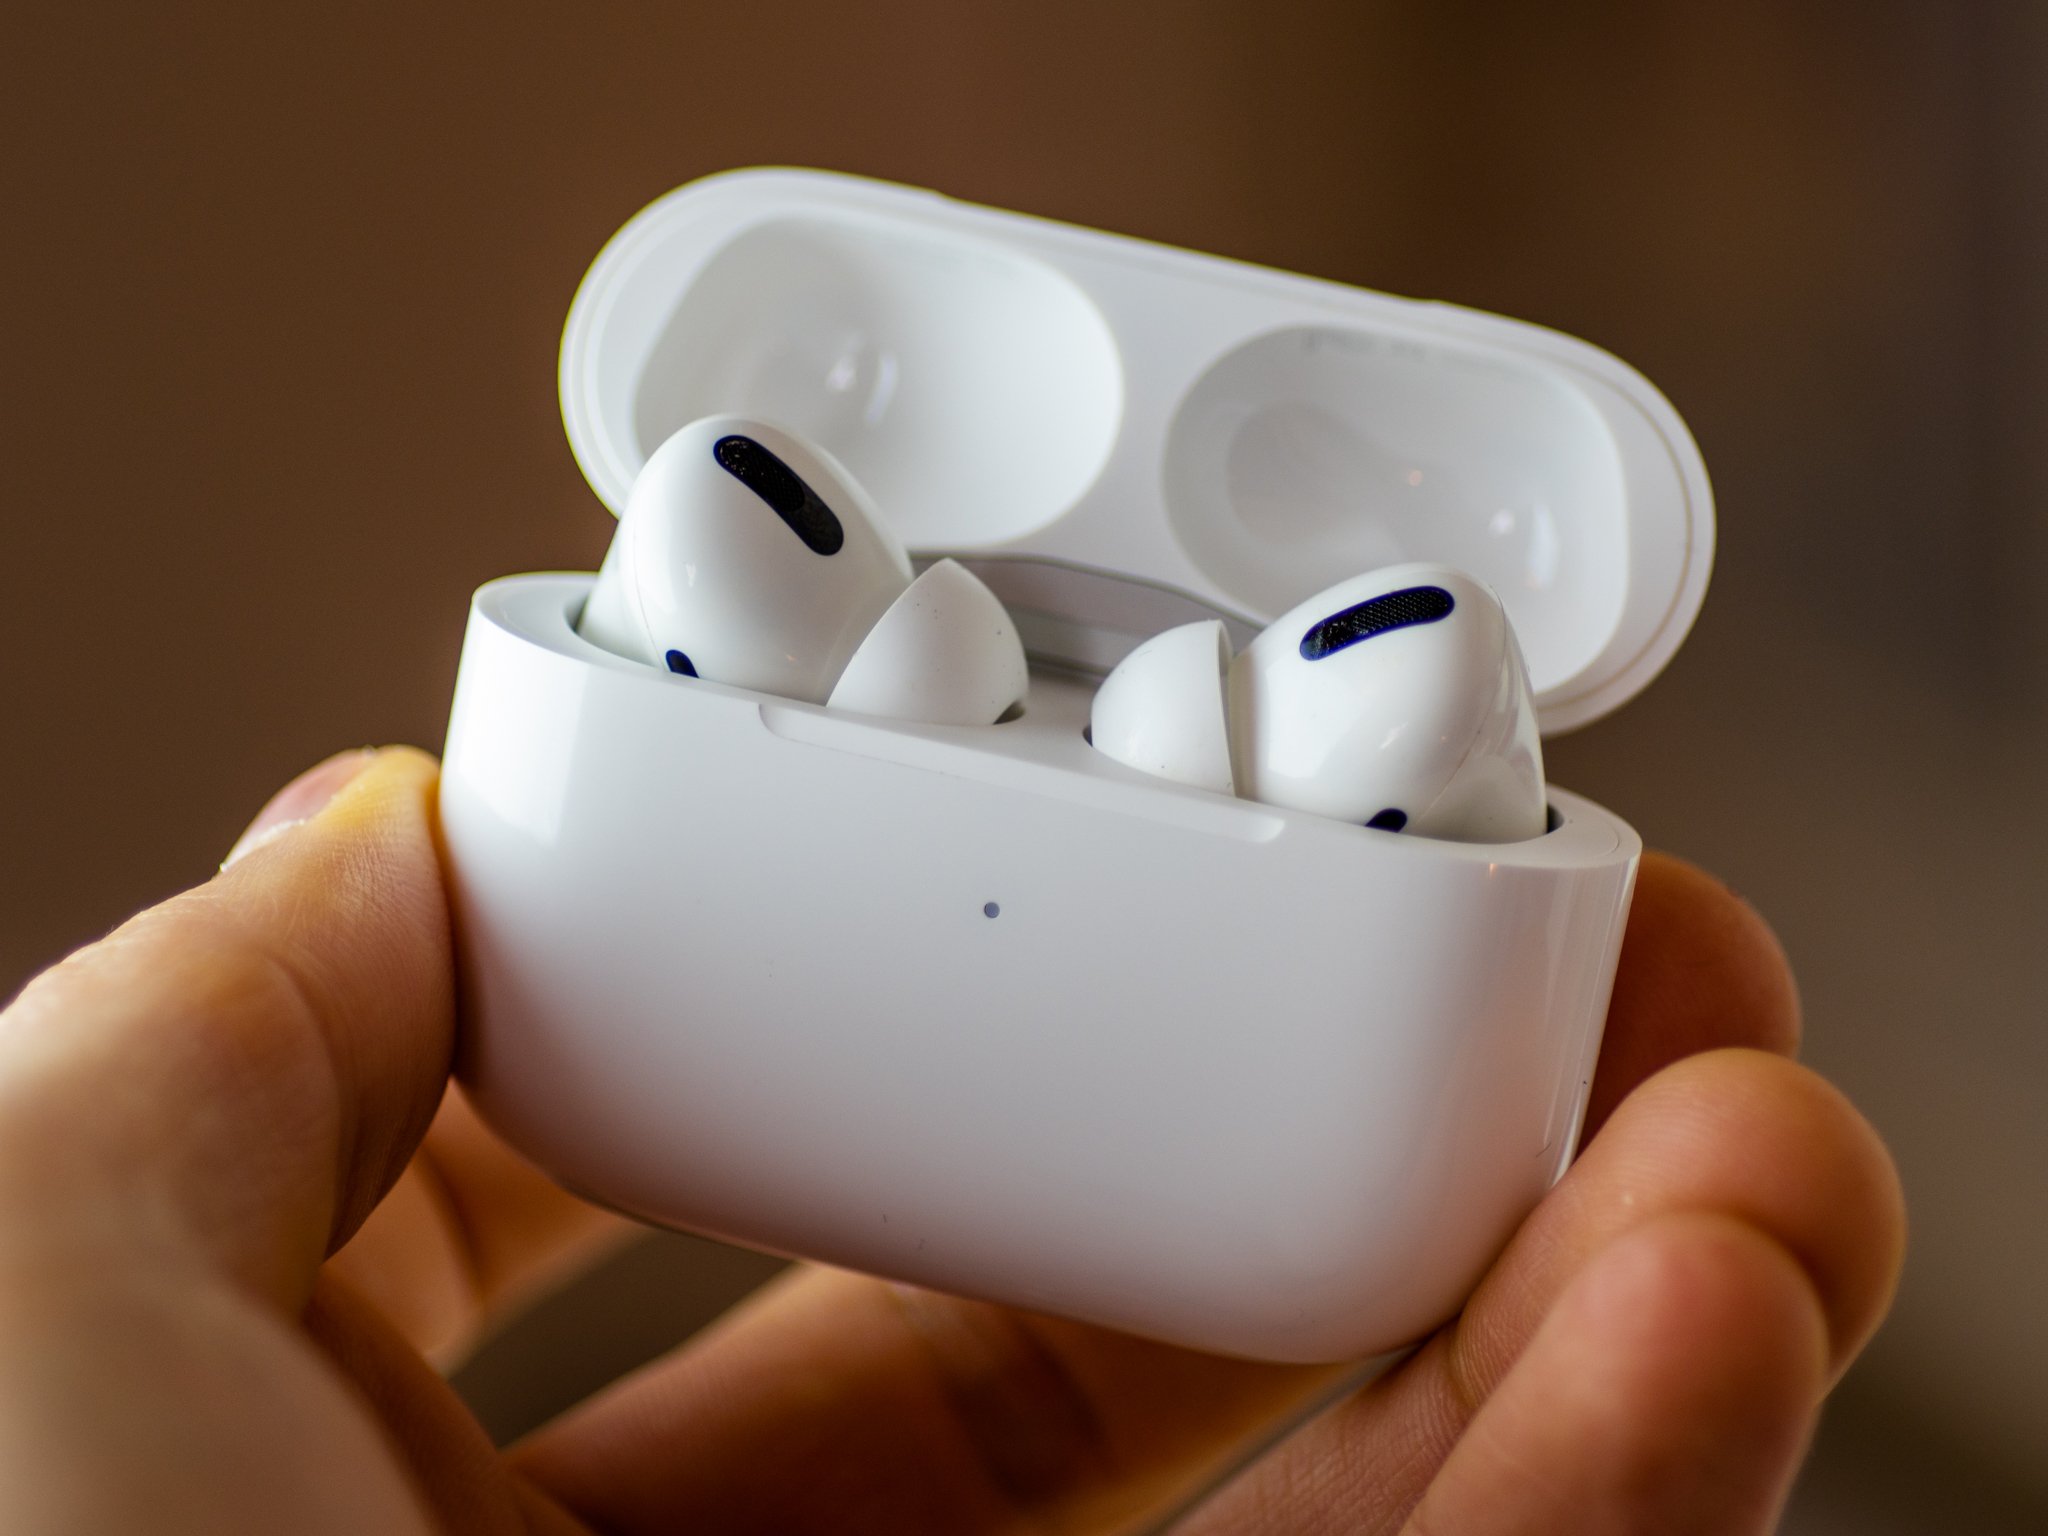 AirPods Pro in case with lid open